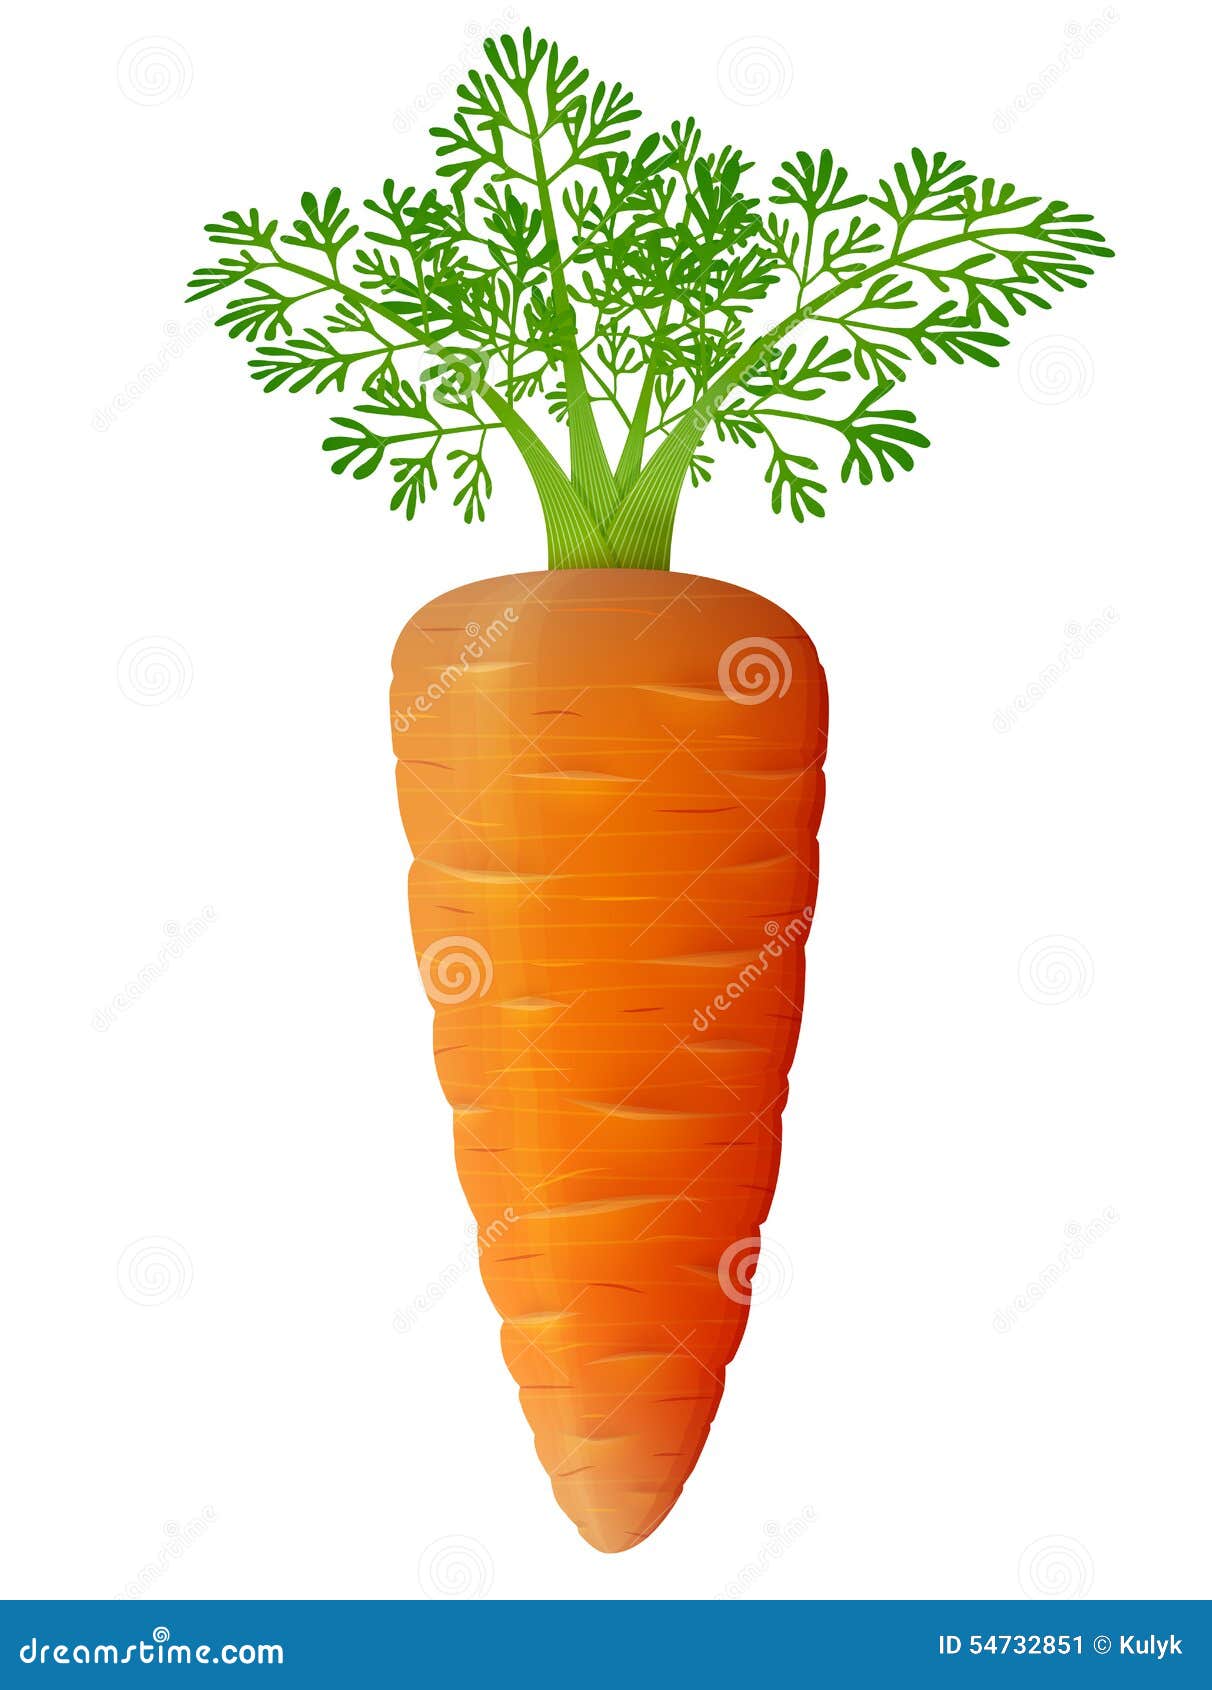 carrot with leaves close up